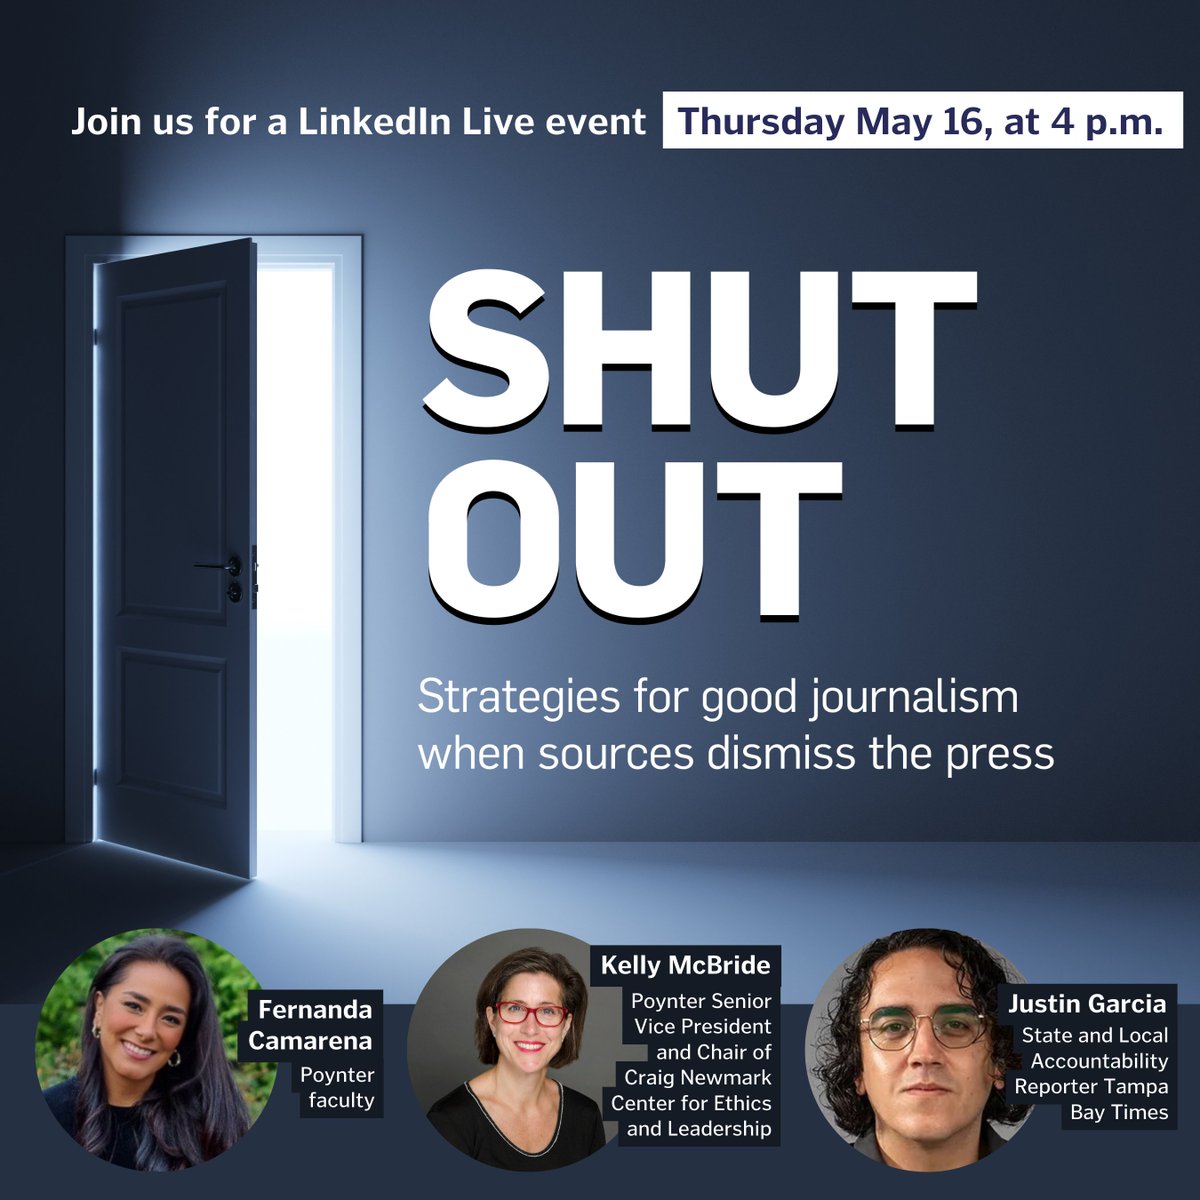 HAPPENING NOW: Join us for a talk with @TB_Times reporter @JustinGarciaFL and Poynter's @kellymcb and @FernandaCamare on how journalists can get their work done when sources deny access and dismiss the press linkedin.com/events/7191887…